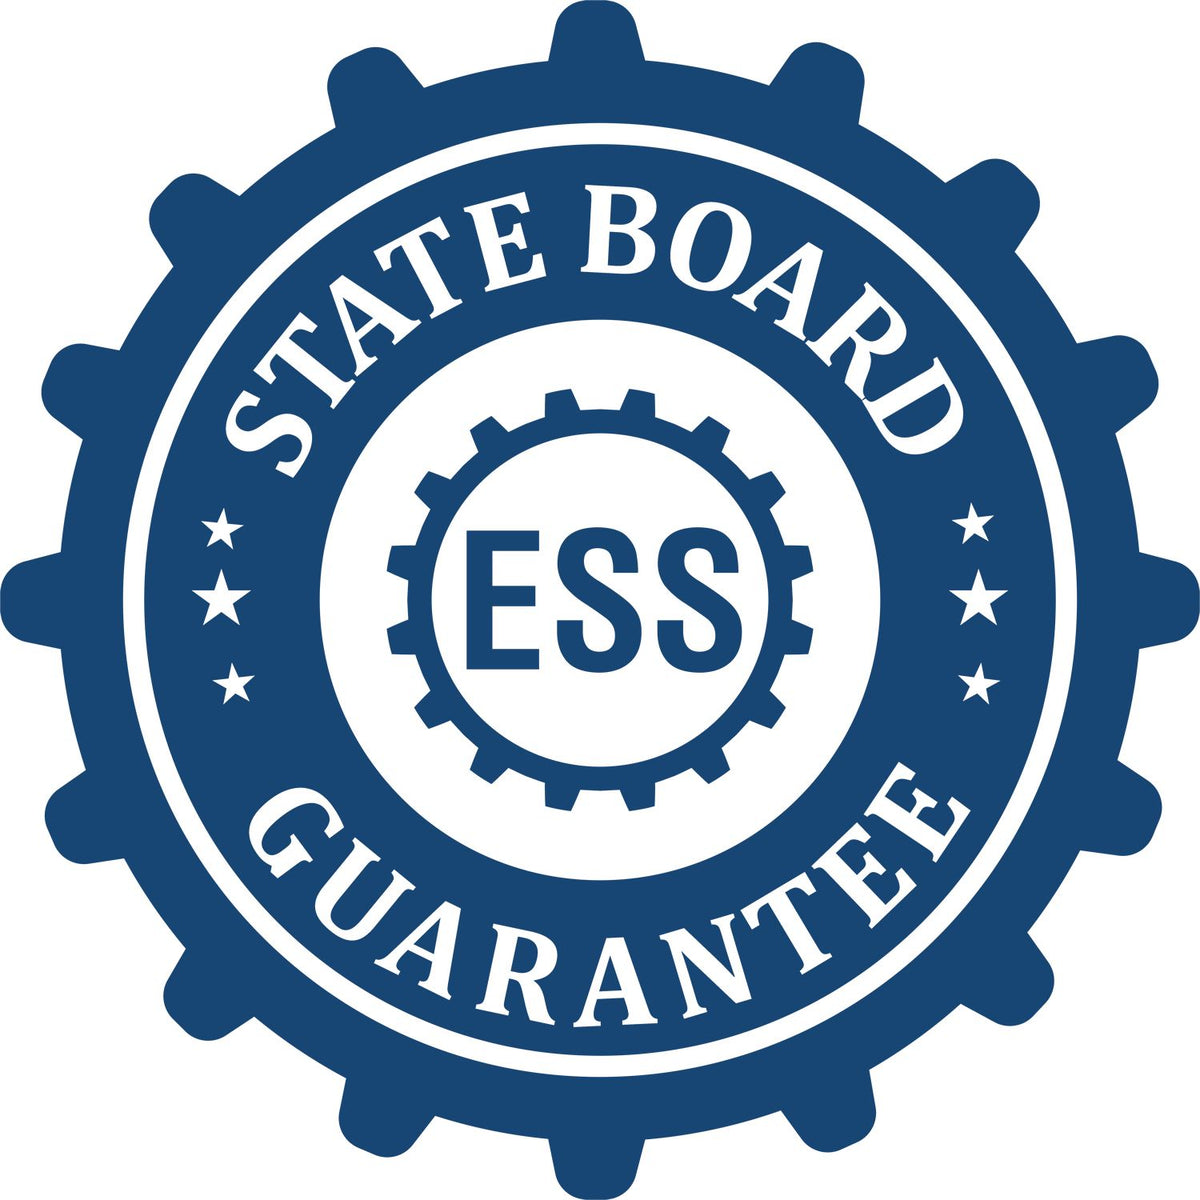 An emblem in a gear shape illustrating a state board guarantee for the Digital Minnesota Landscape Architect Stamp product.